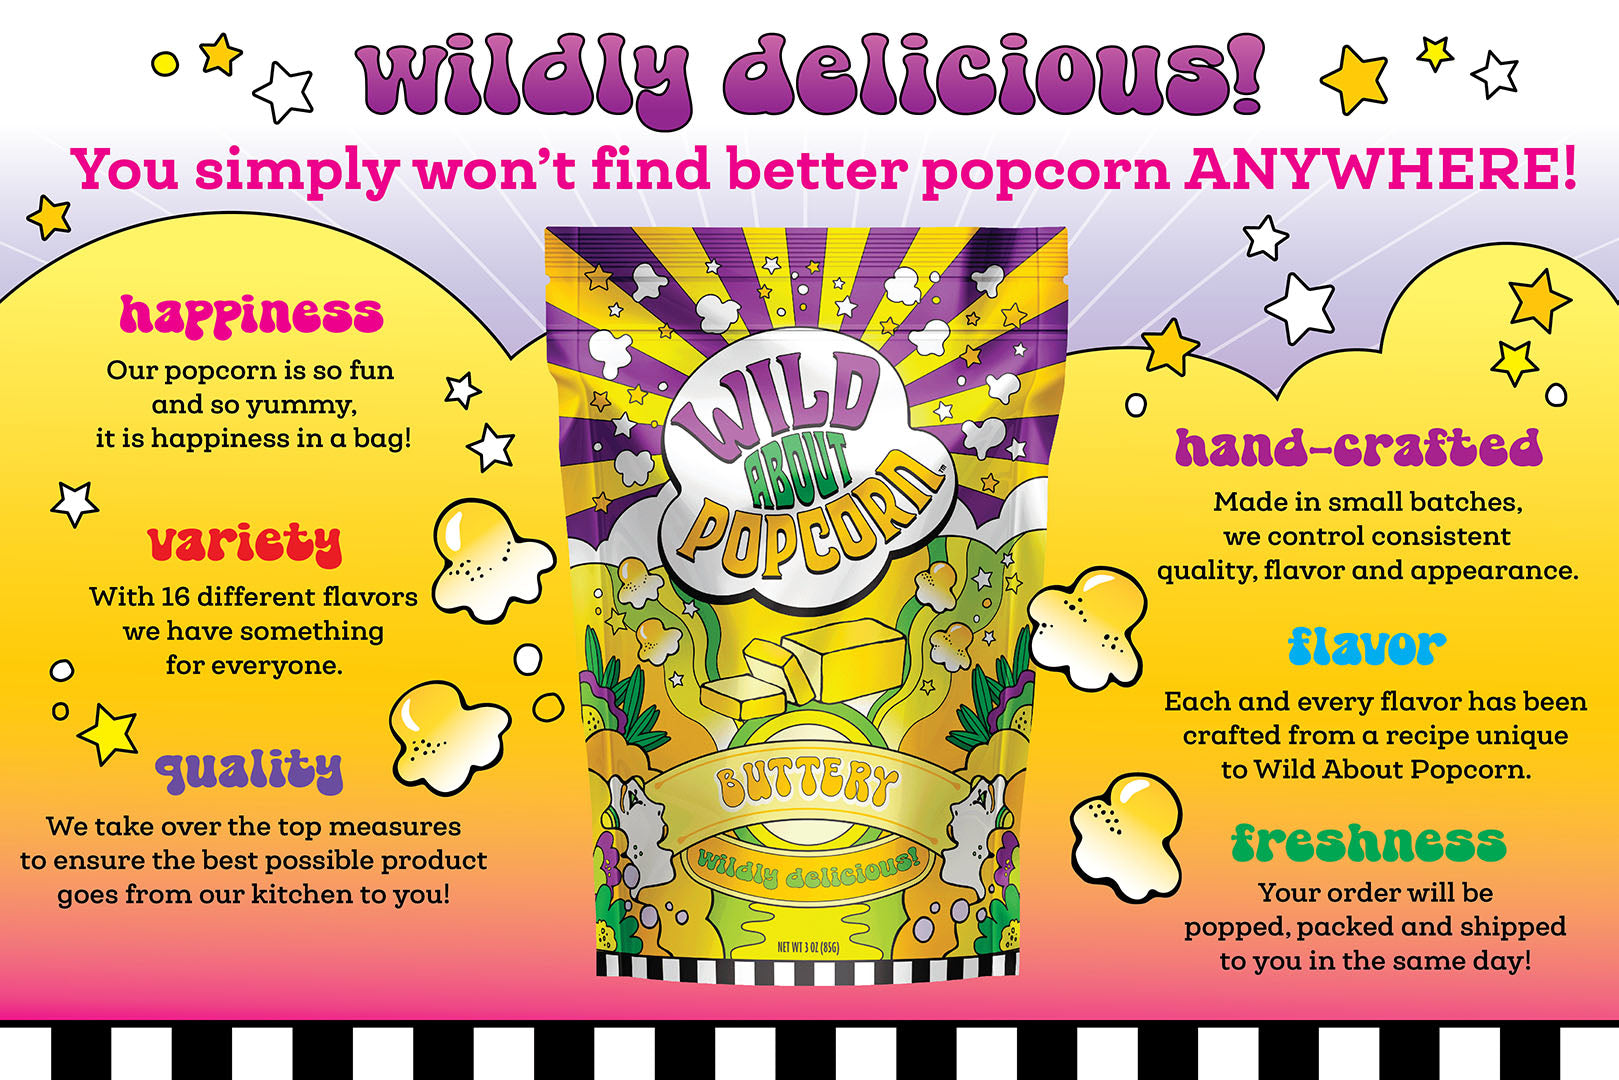 Wild About Popcorn Gourmet Popcorn Hand-Crafted Fresh Quality Flavored Popcorn